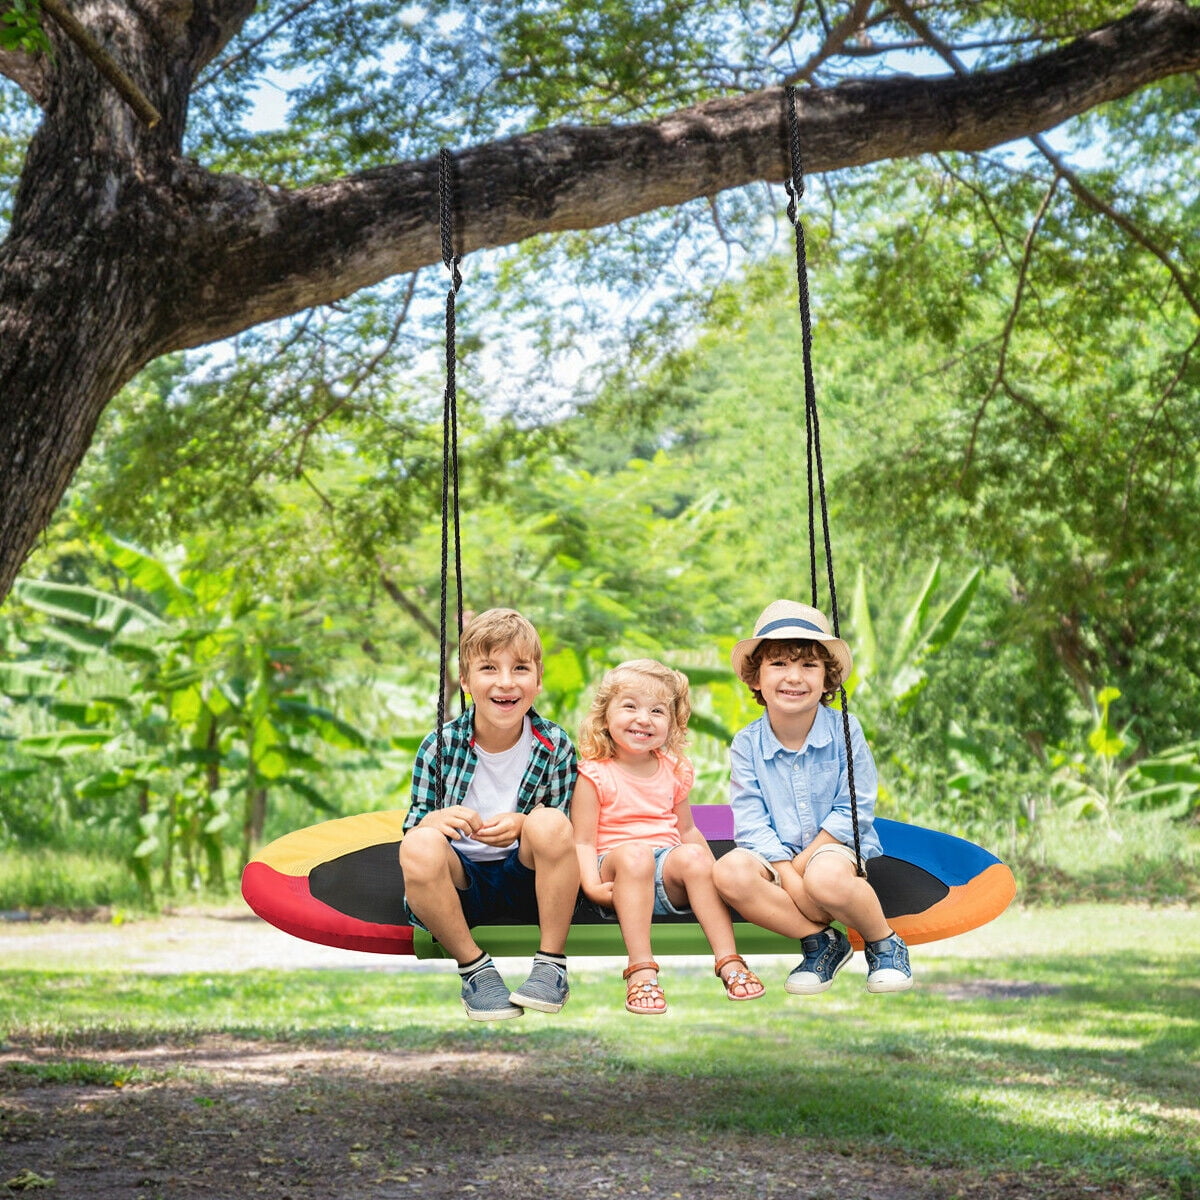 Easy to Install Tonahutu 60 Inch Platform Tree Swing for Kids and Adults 440LB Weight Capacity Waterproof Durable Steel Frame Giant Flying Saucer Indoor Outdoor Swing Set with Straps Carabiners 